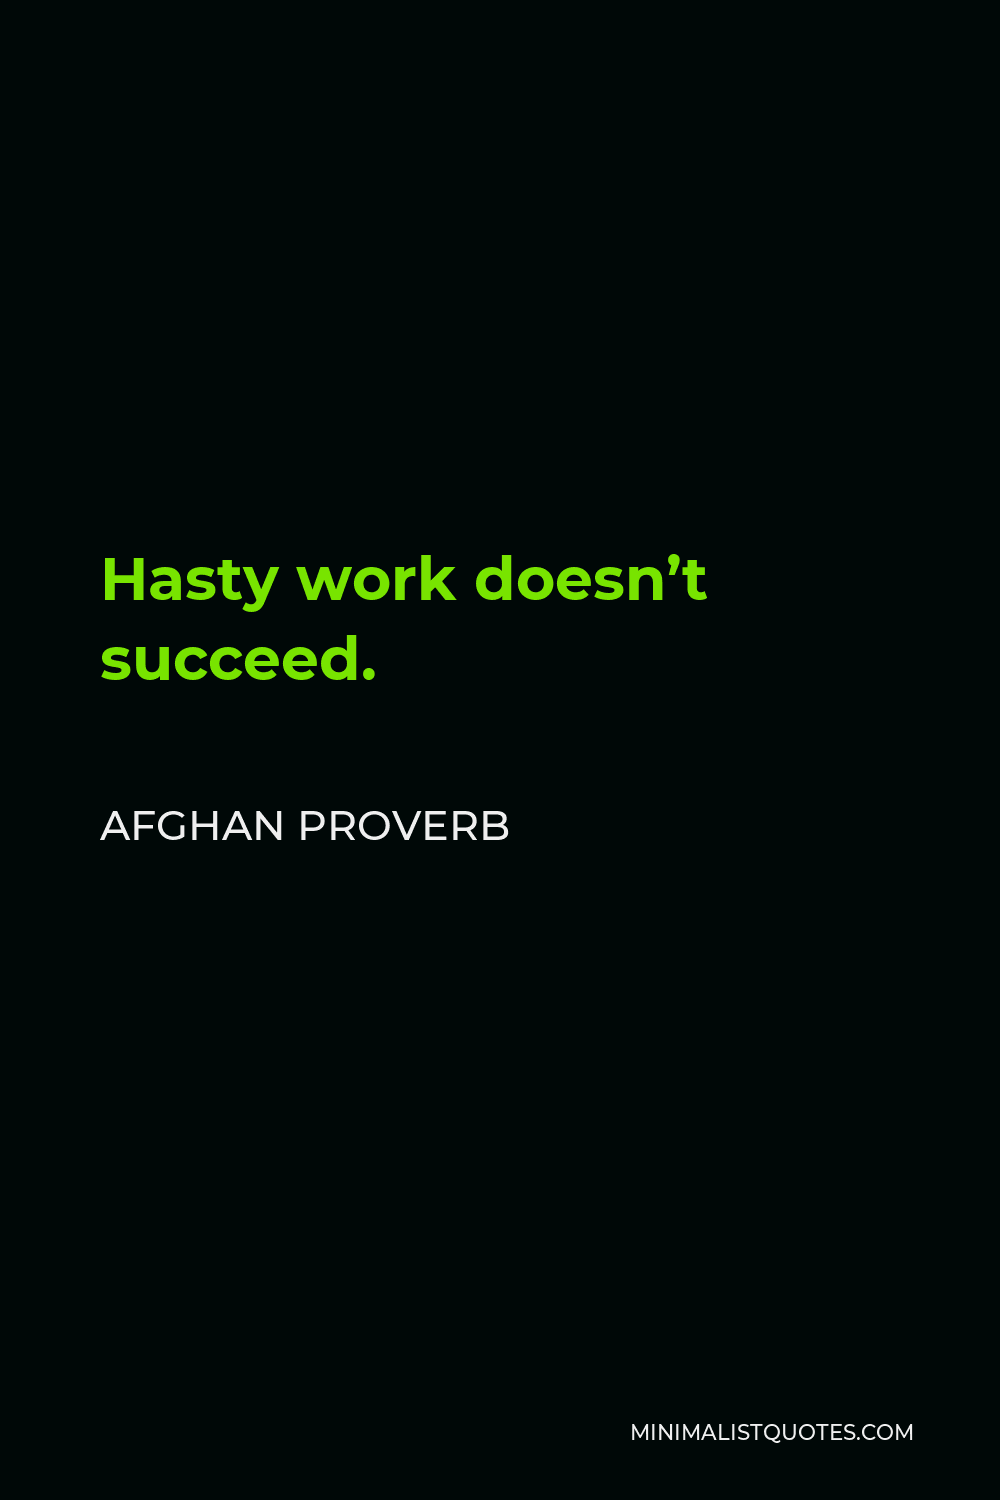 Afghan Proverb Quote - Hasty work doesn’t succeed.